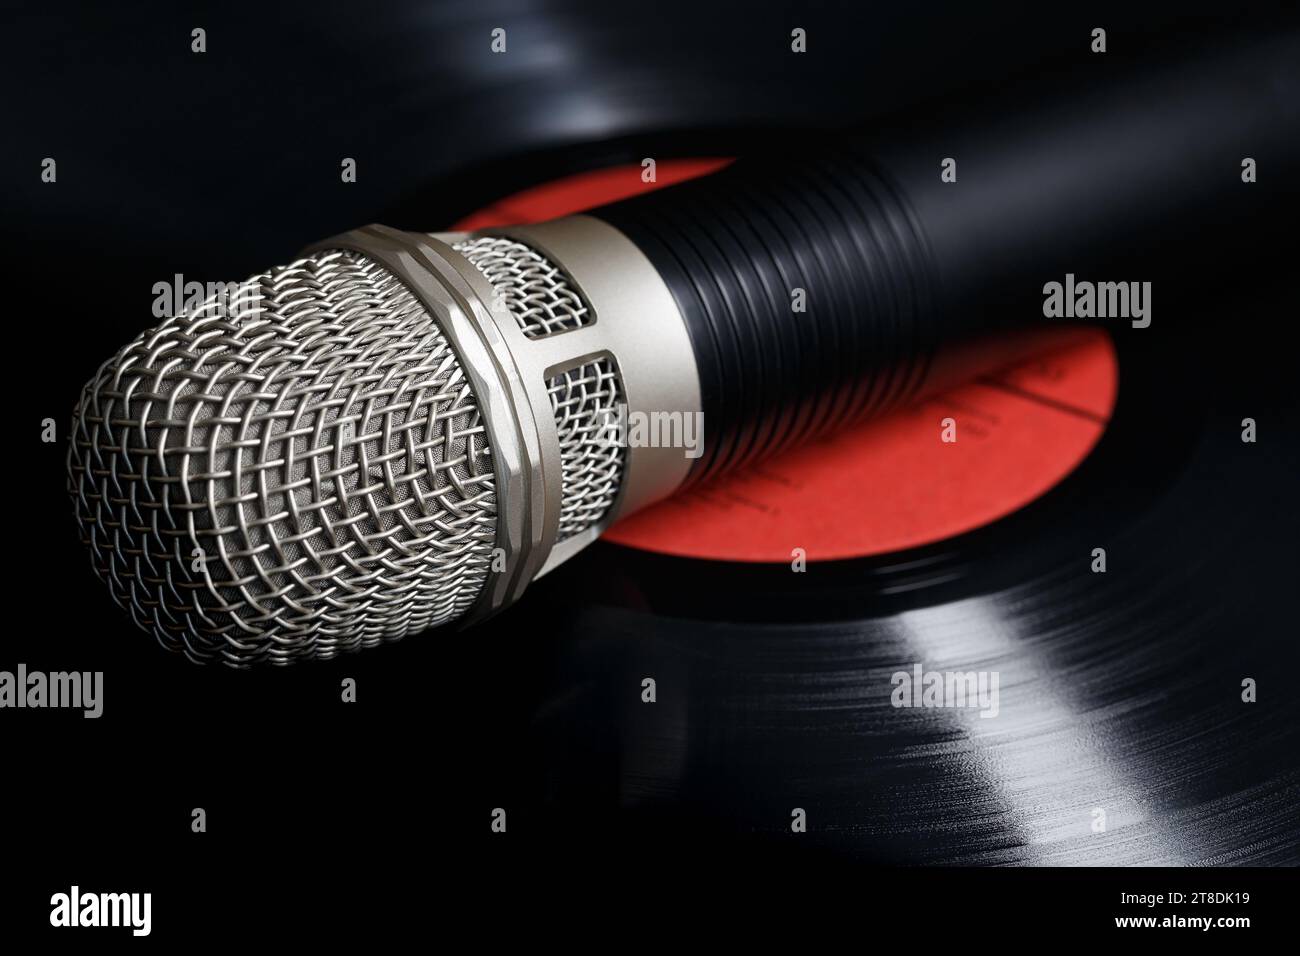 The microphone is lying on a vinyl record, with the reflection of light highlighting the sound tracks. Analogue sound recording concept Stock Photo